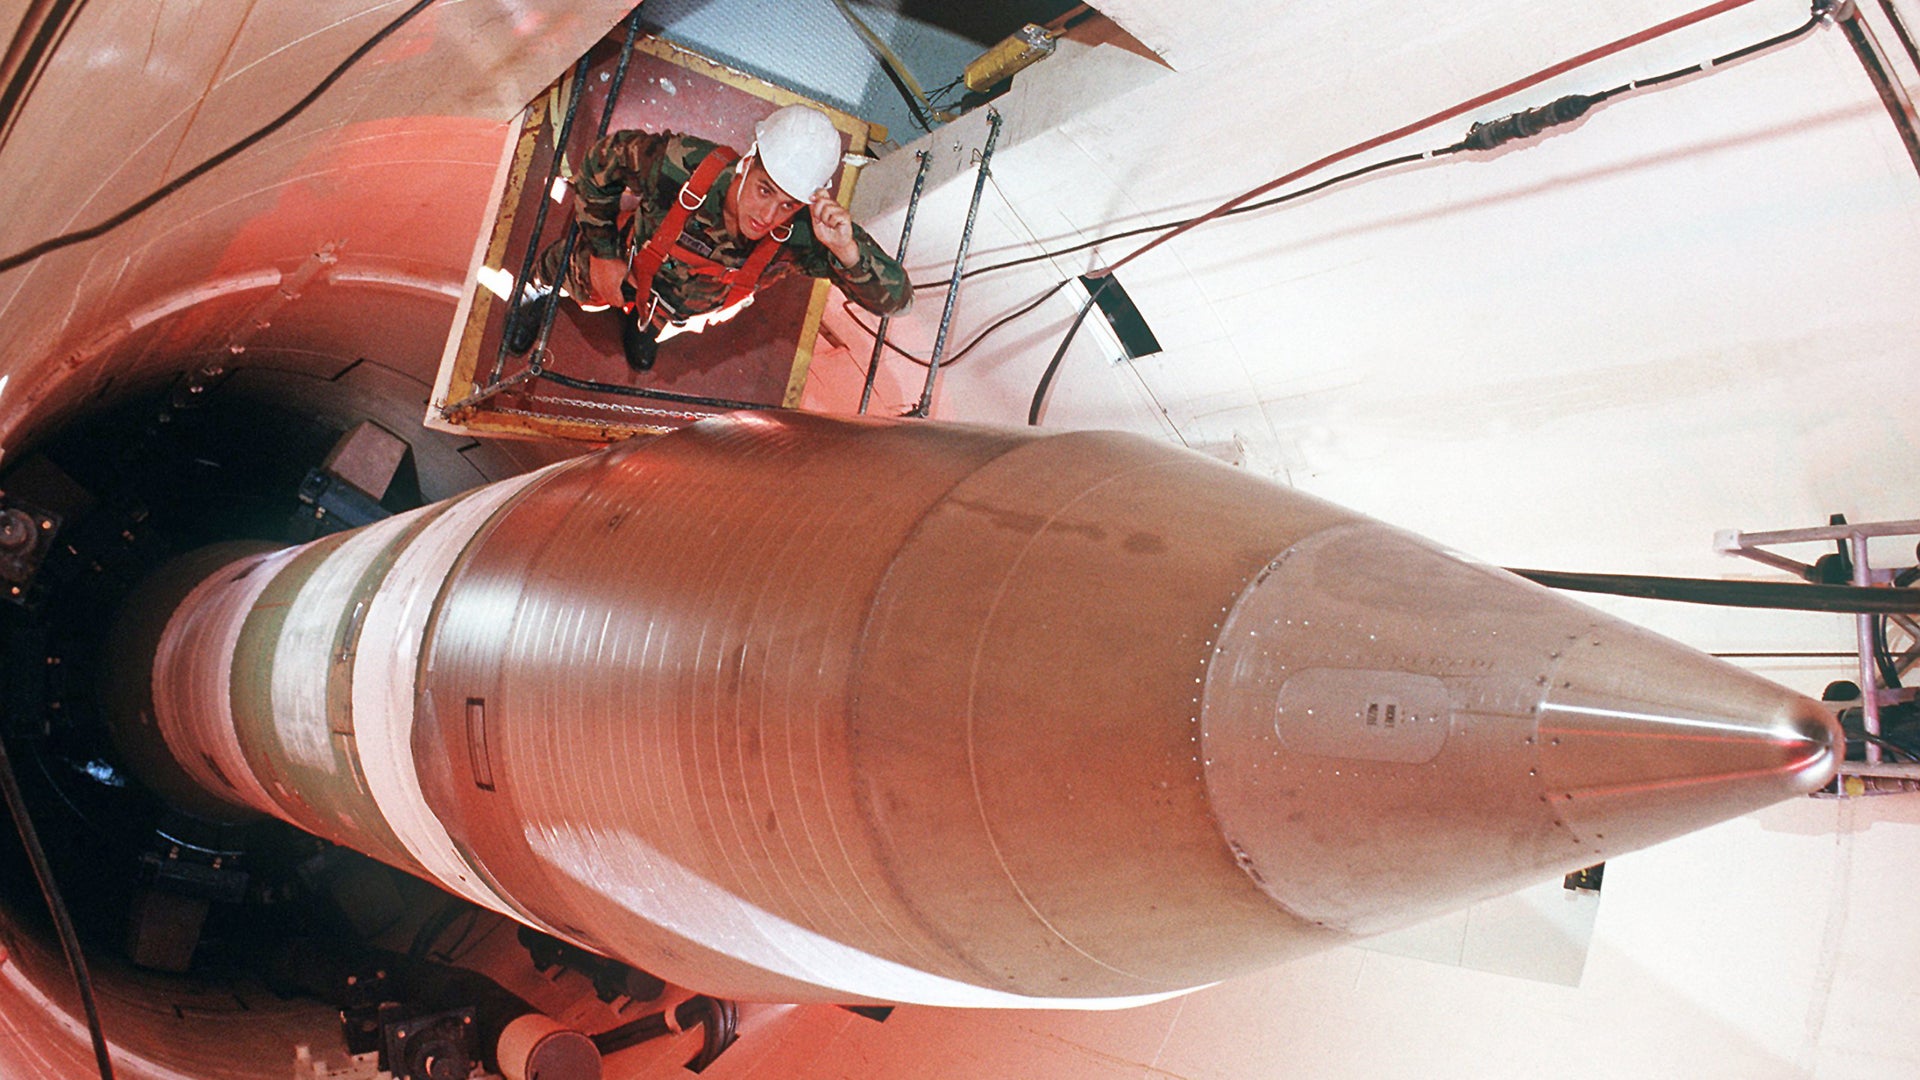 USAF Awards Contractors Big Bucks for New ICBMs, But Future of Missiles is Uncertain